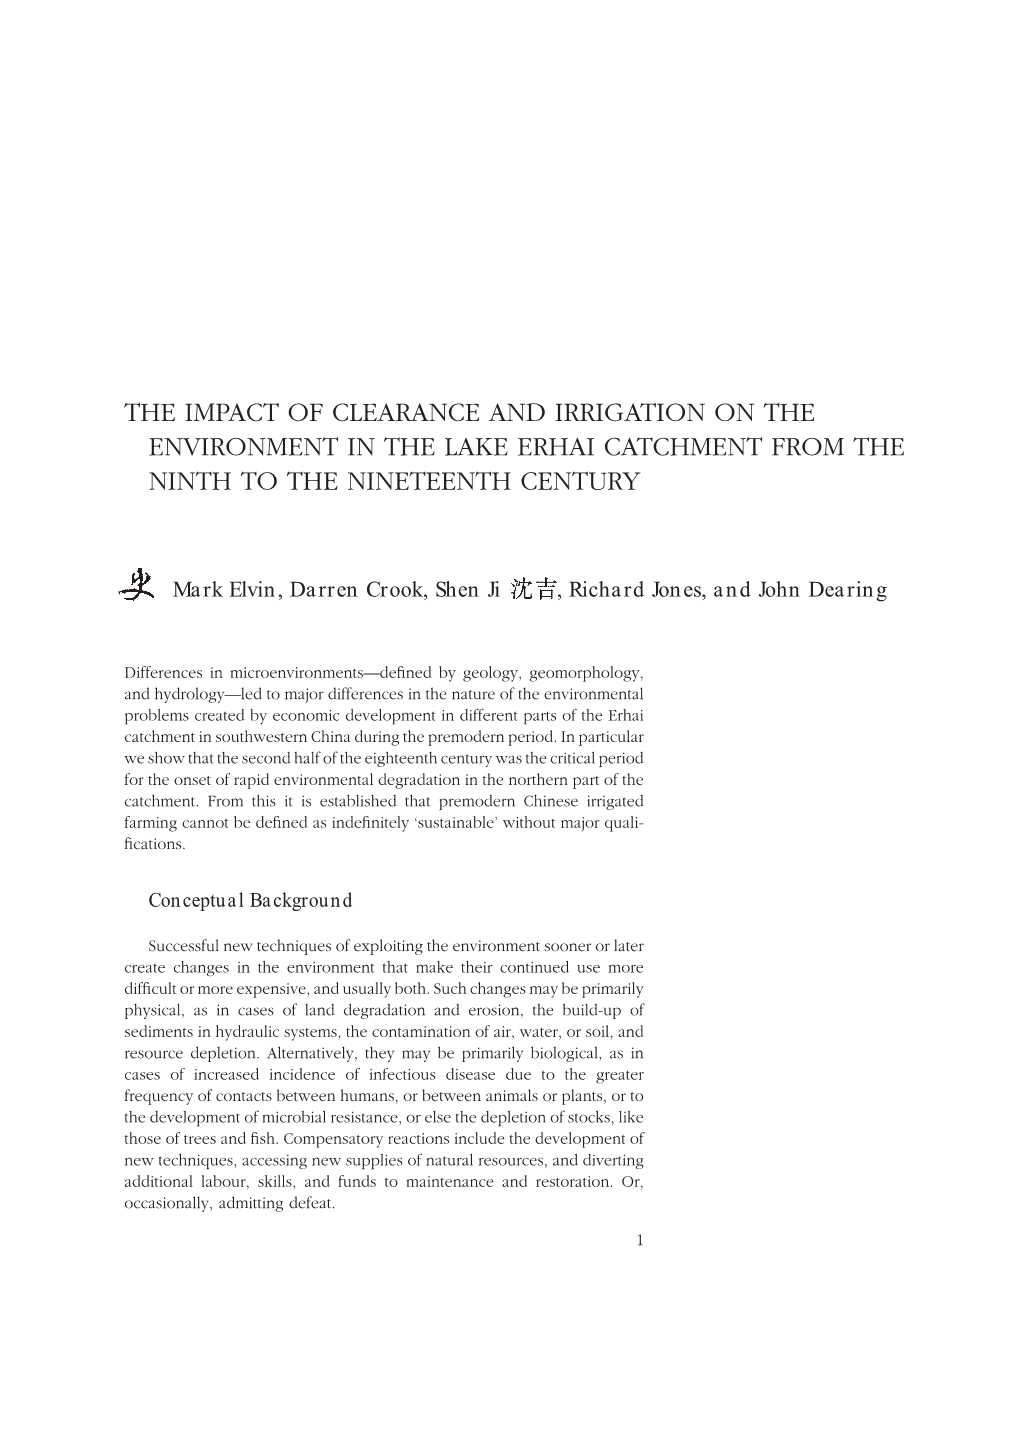 The Impact of Clearance and Irrigation on the Environment in the Lake Erhai Catchment from the Ninth to the Nineteenth Century